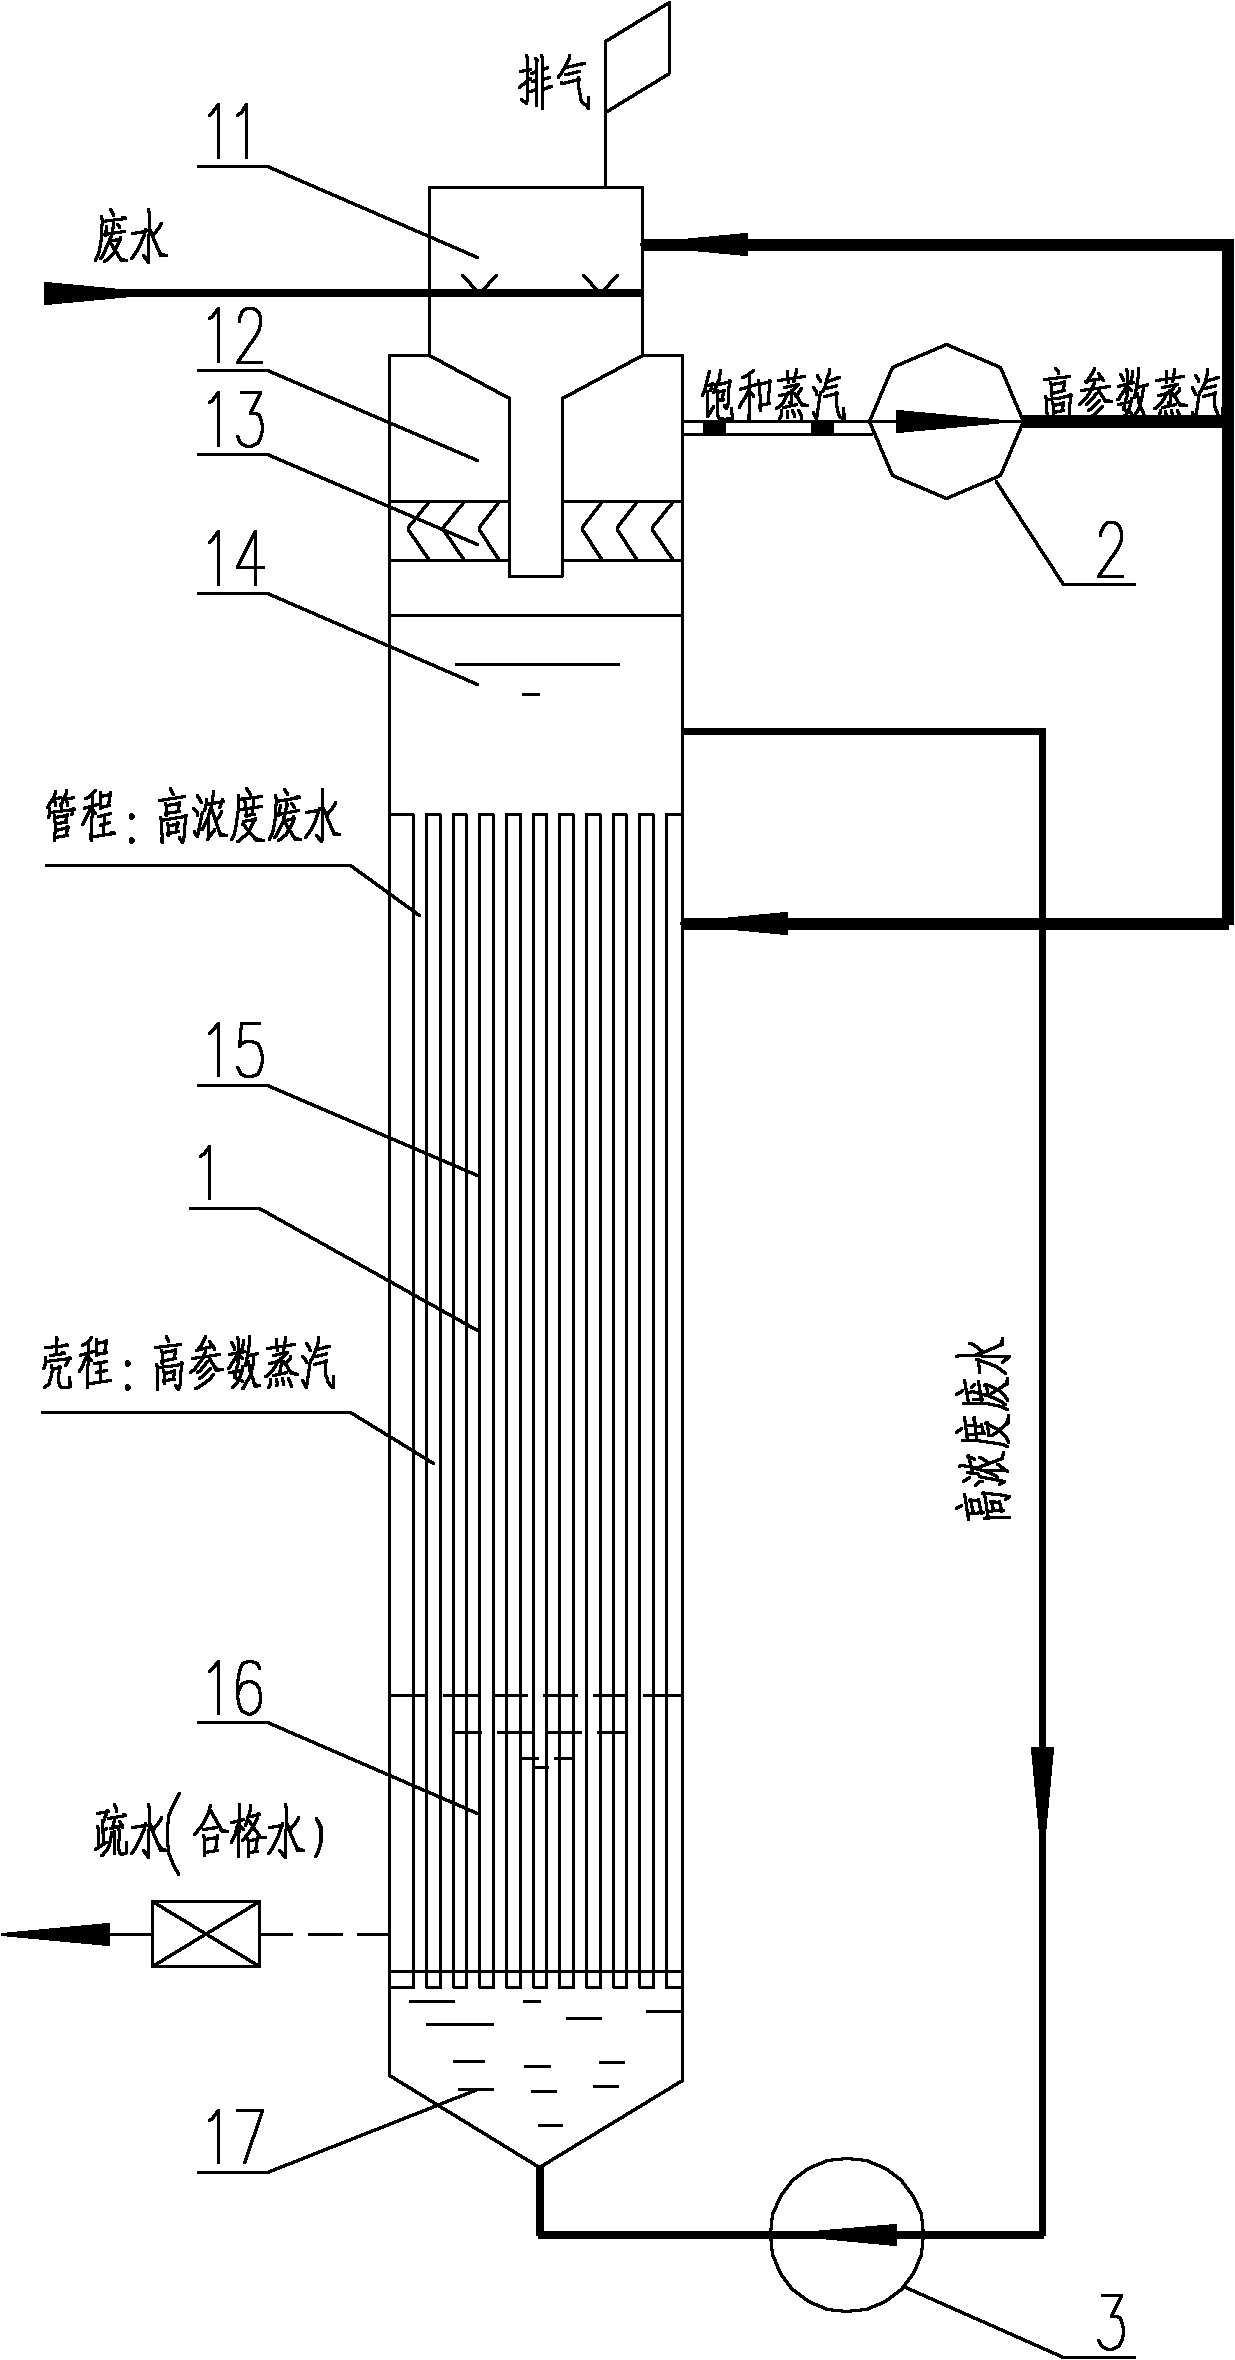 Thermal waste water treatment apparatus and method employing heat pump